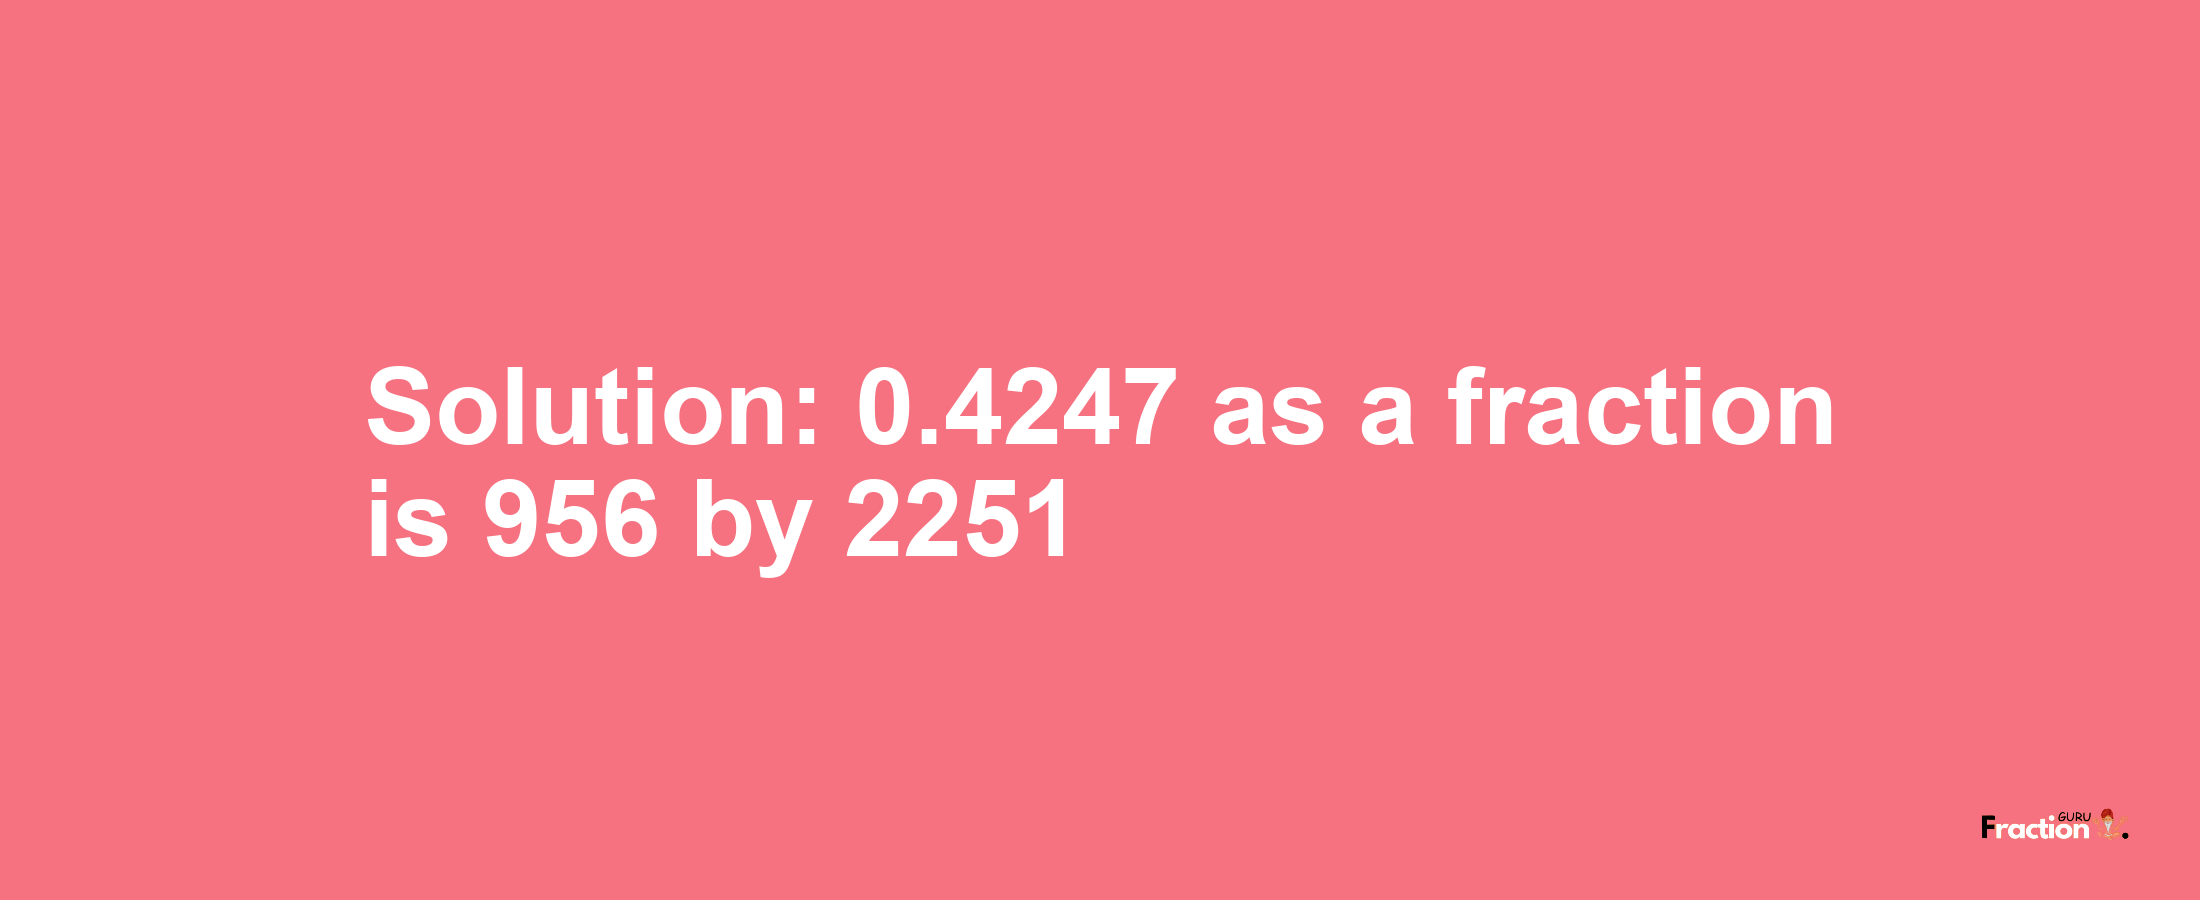 Solution:0.4247 as a fraction is 956/2251